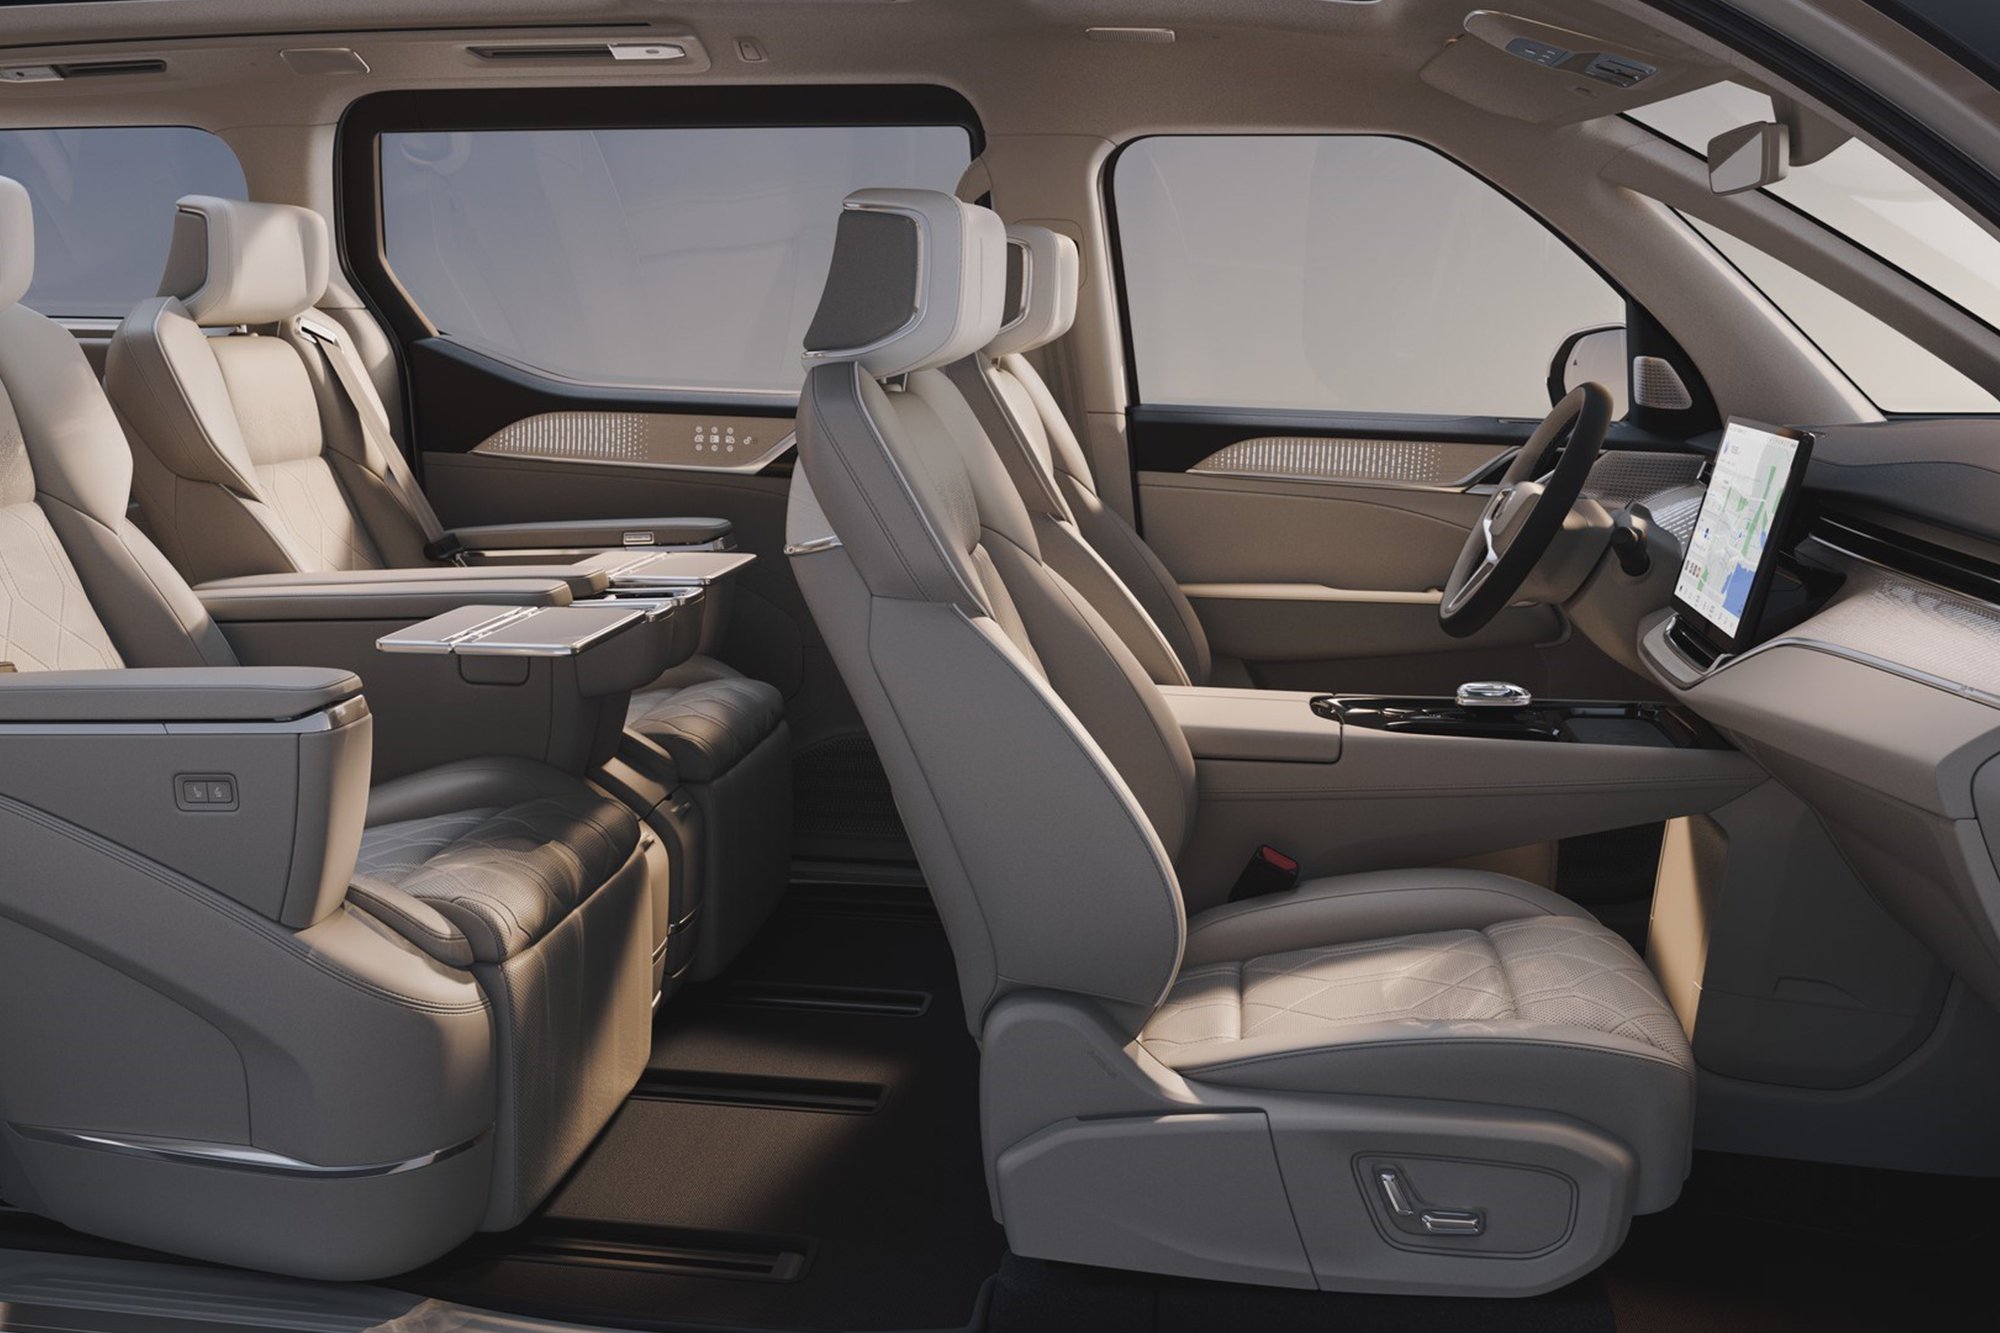 The seat design with massage function of the Volvo EM90